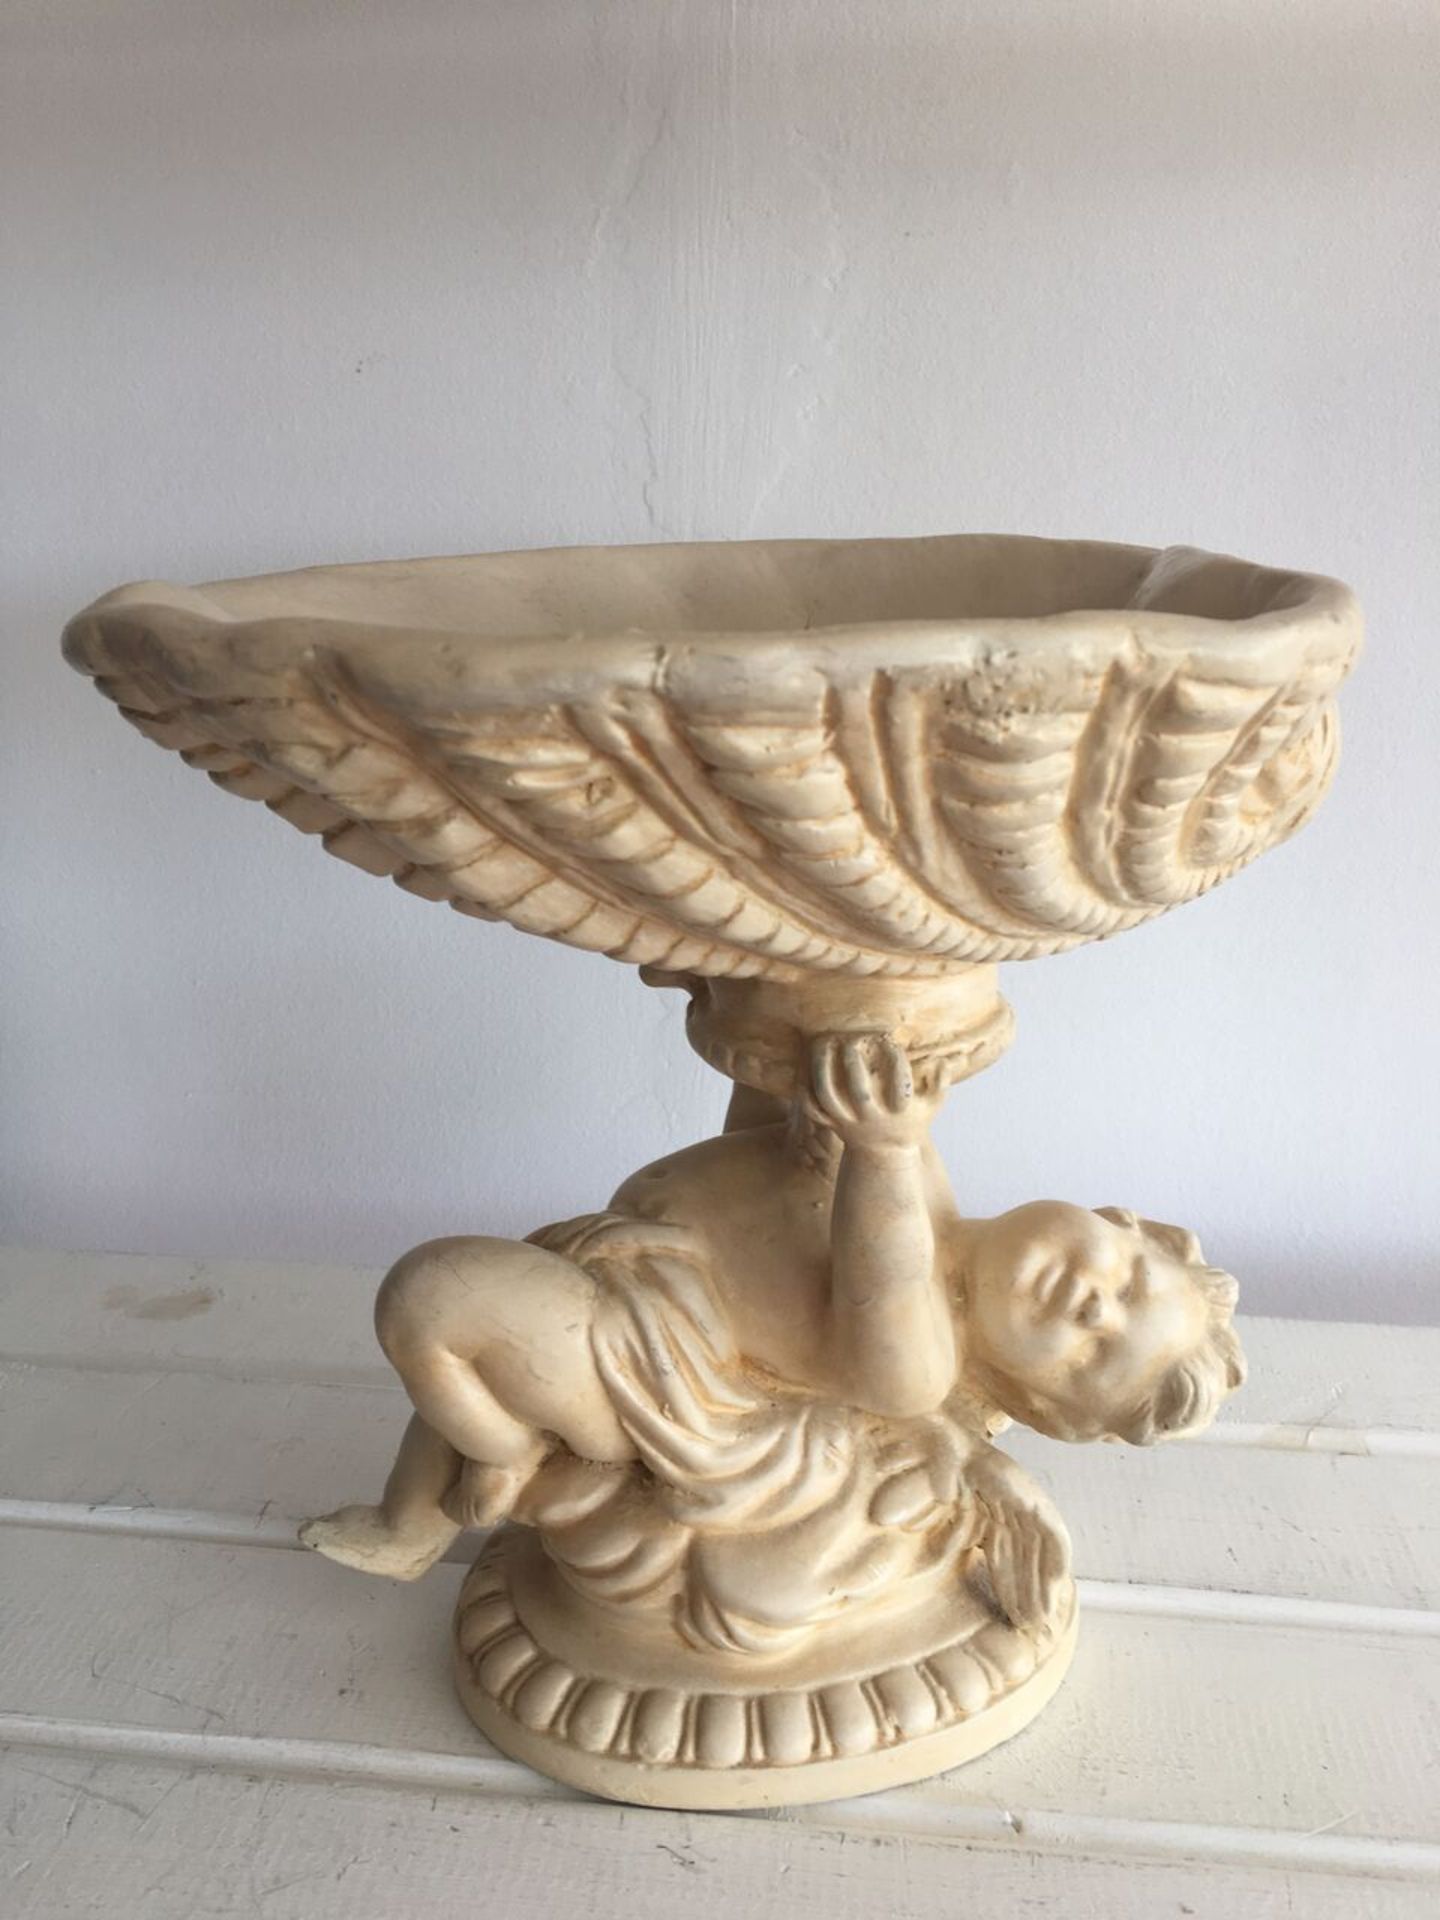 LARGE PLASTER FIGURE OF A CHERUB HOLDING UP A SHELL. 25CM HIGH. FREE UK DELIVERY. NO VAT.